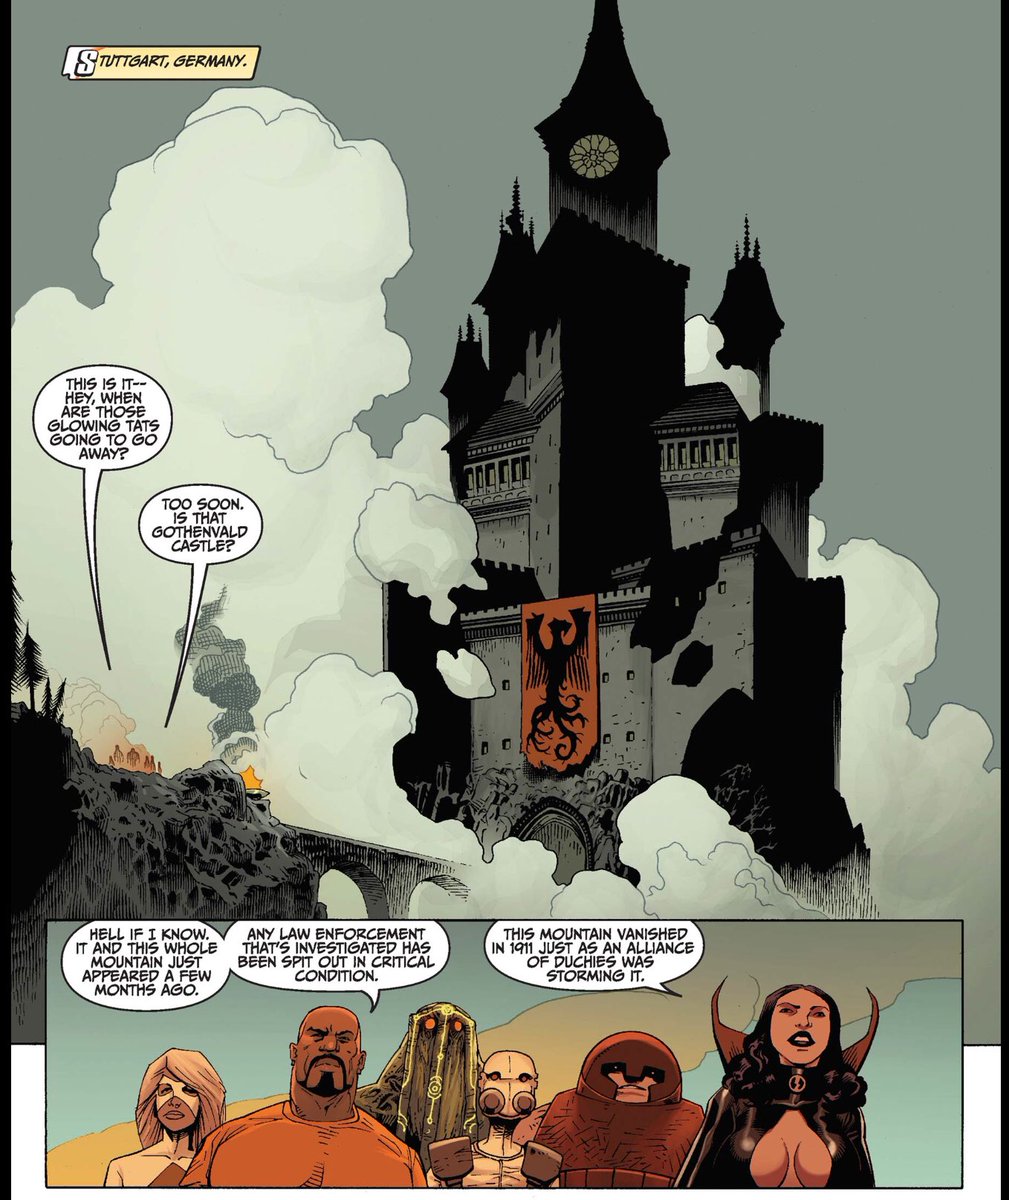 In 1911, the occultist Baron Gothenvald and his entire Mignola-y castle disappeared, just as they were about to be sacked - but now they’ve reappeared in modern-day Stuttgart, and the Thunderbolts are on the case!